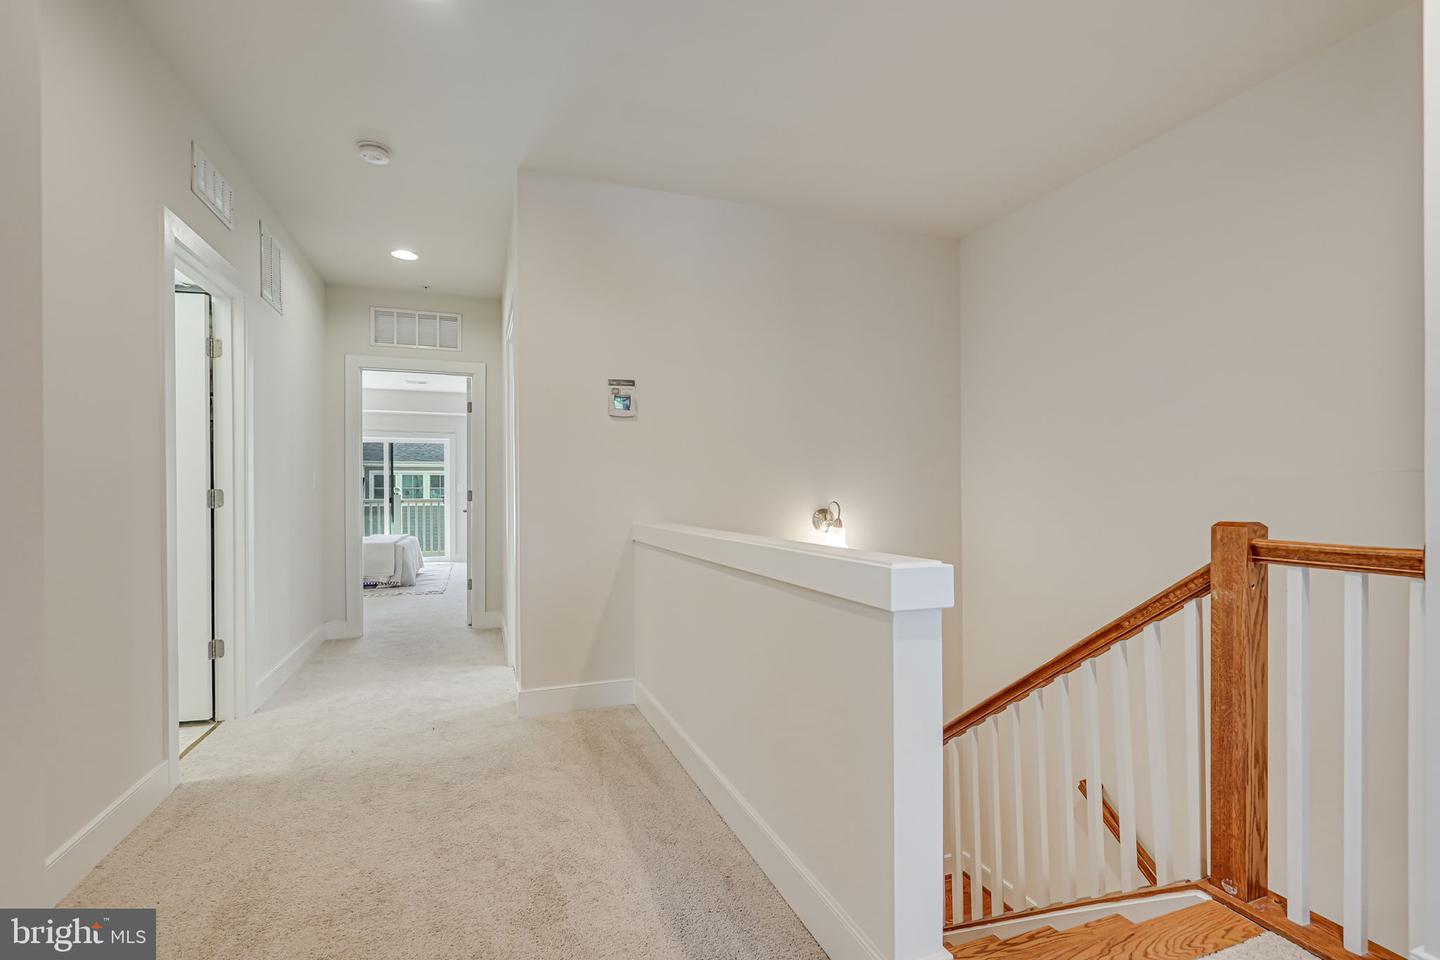 Photo 15 of 42 of 2213 Richmond Hwy #101 townhome